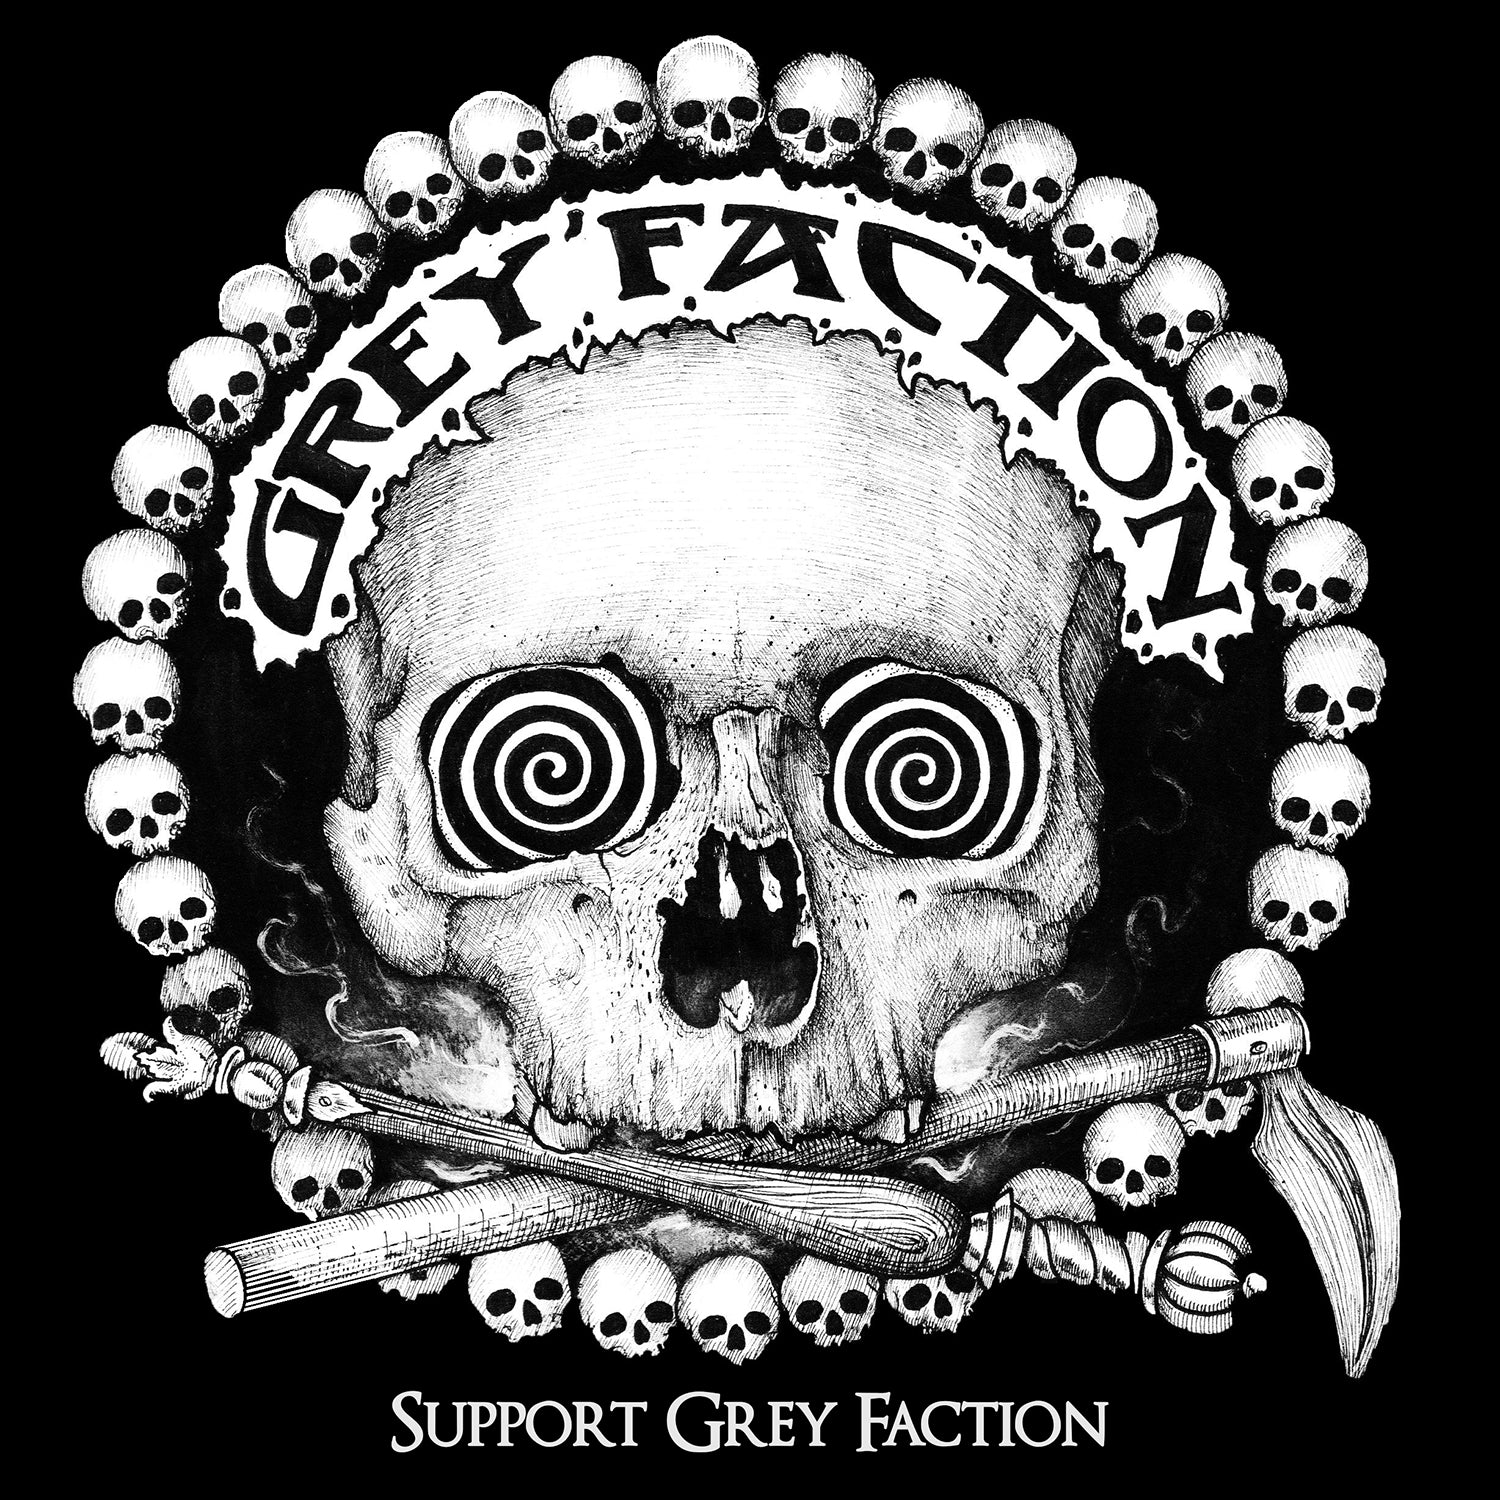 Contribute to Grey Faction